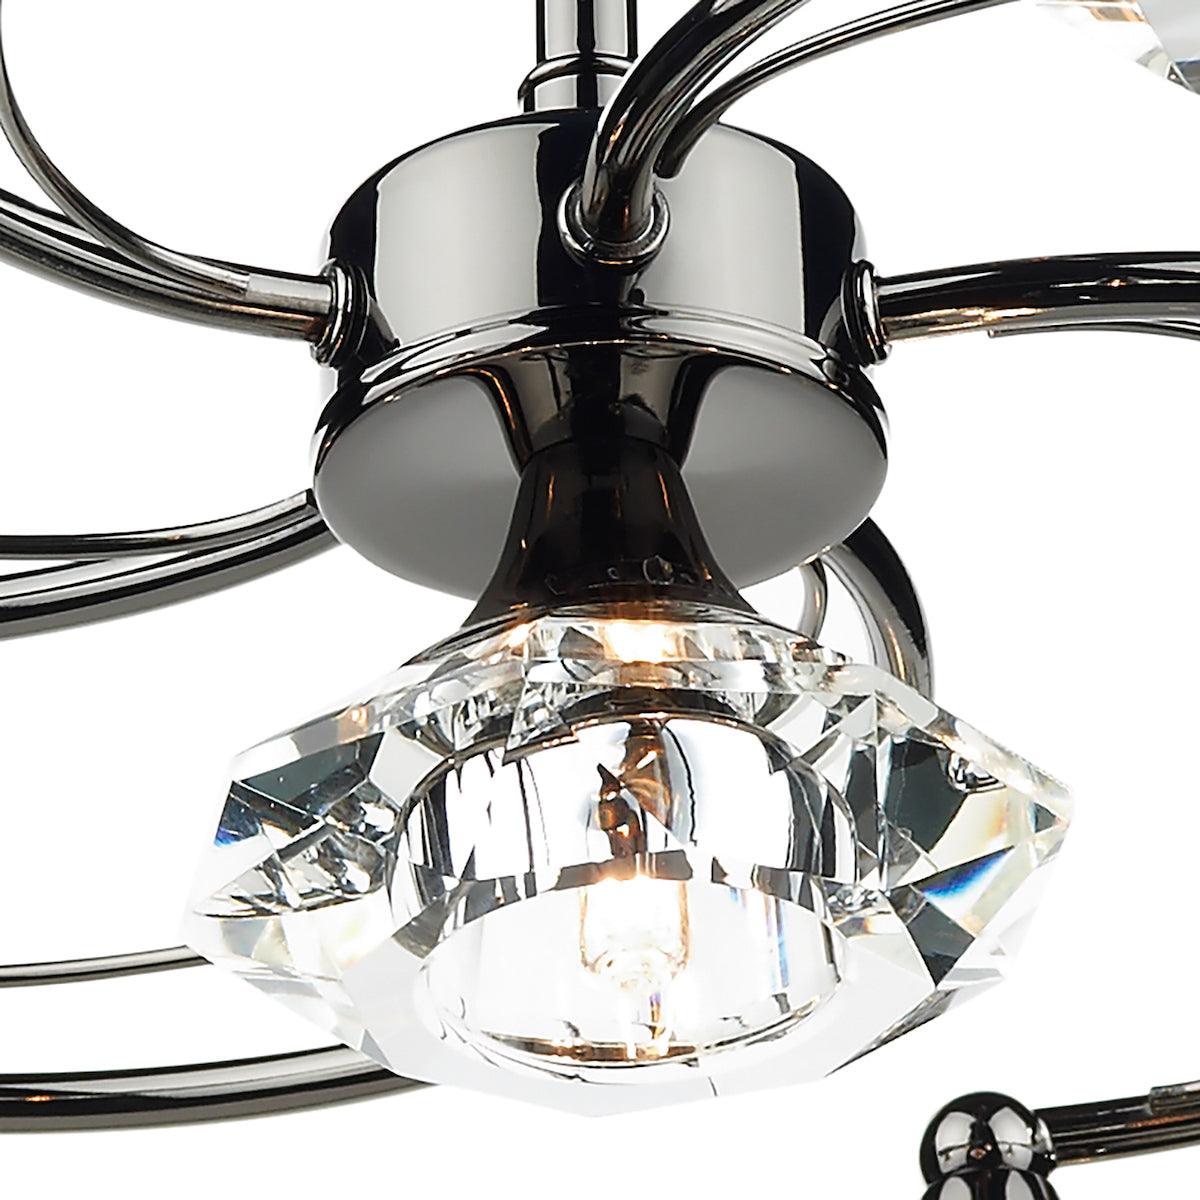 Luther 6 Light Semi Flush complete with Crystal Glass Black Chrome - Peter Murphy Lighting & Electrical Ltd